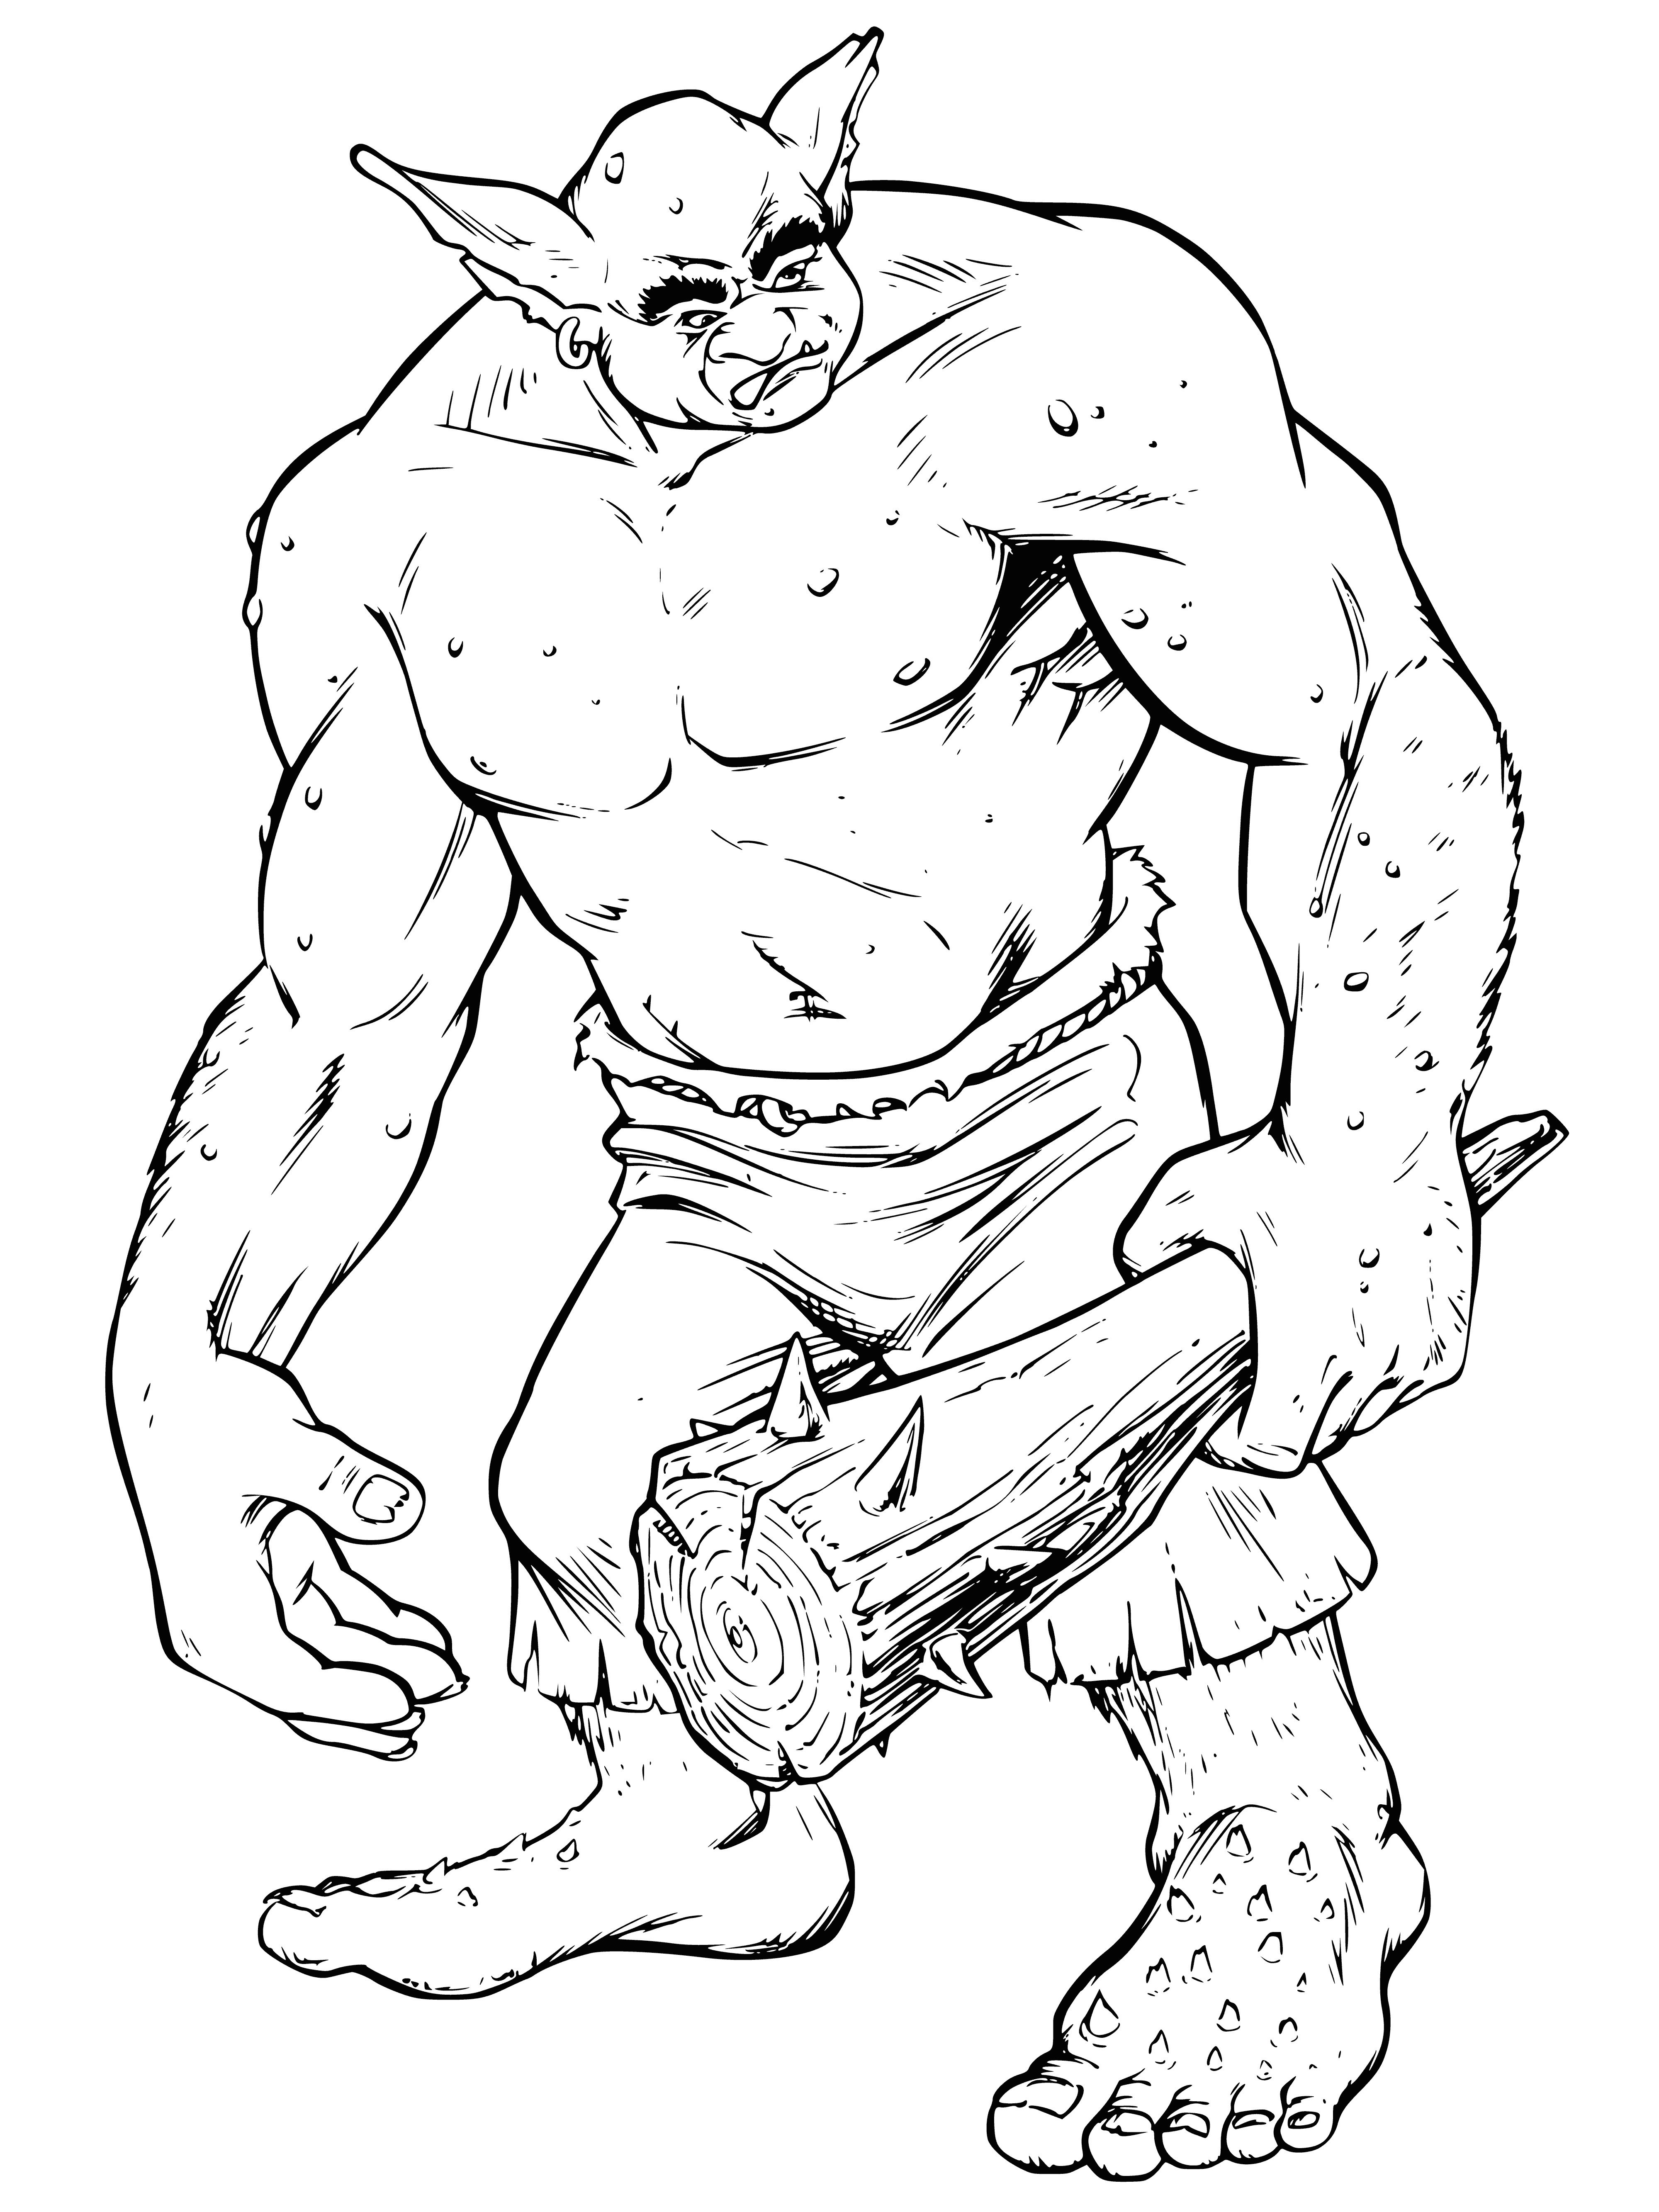 Cave troll coloring page